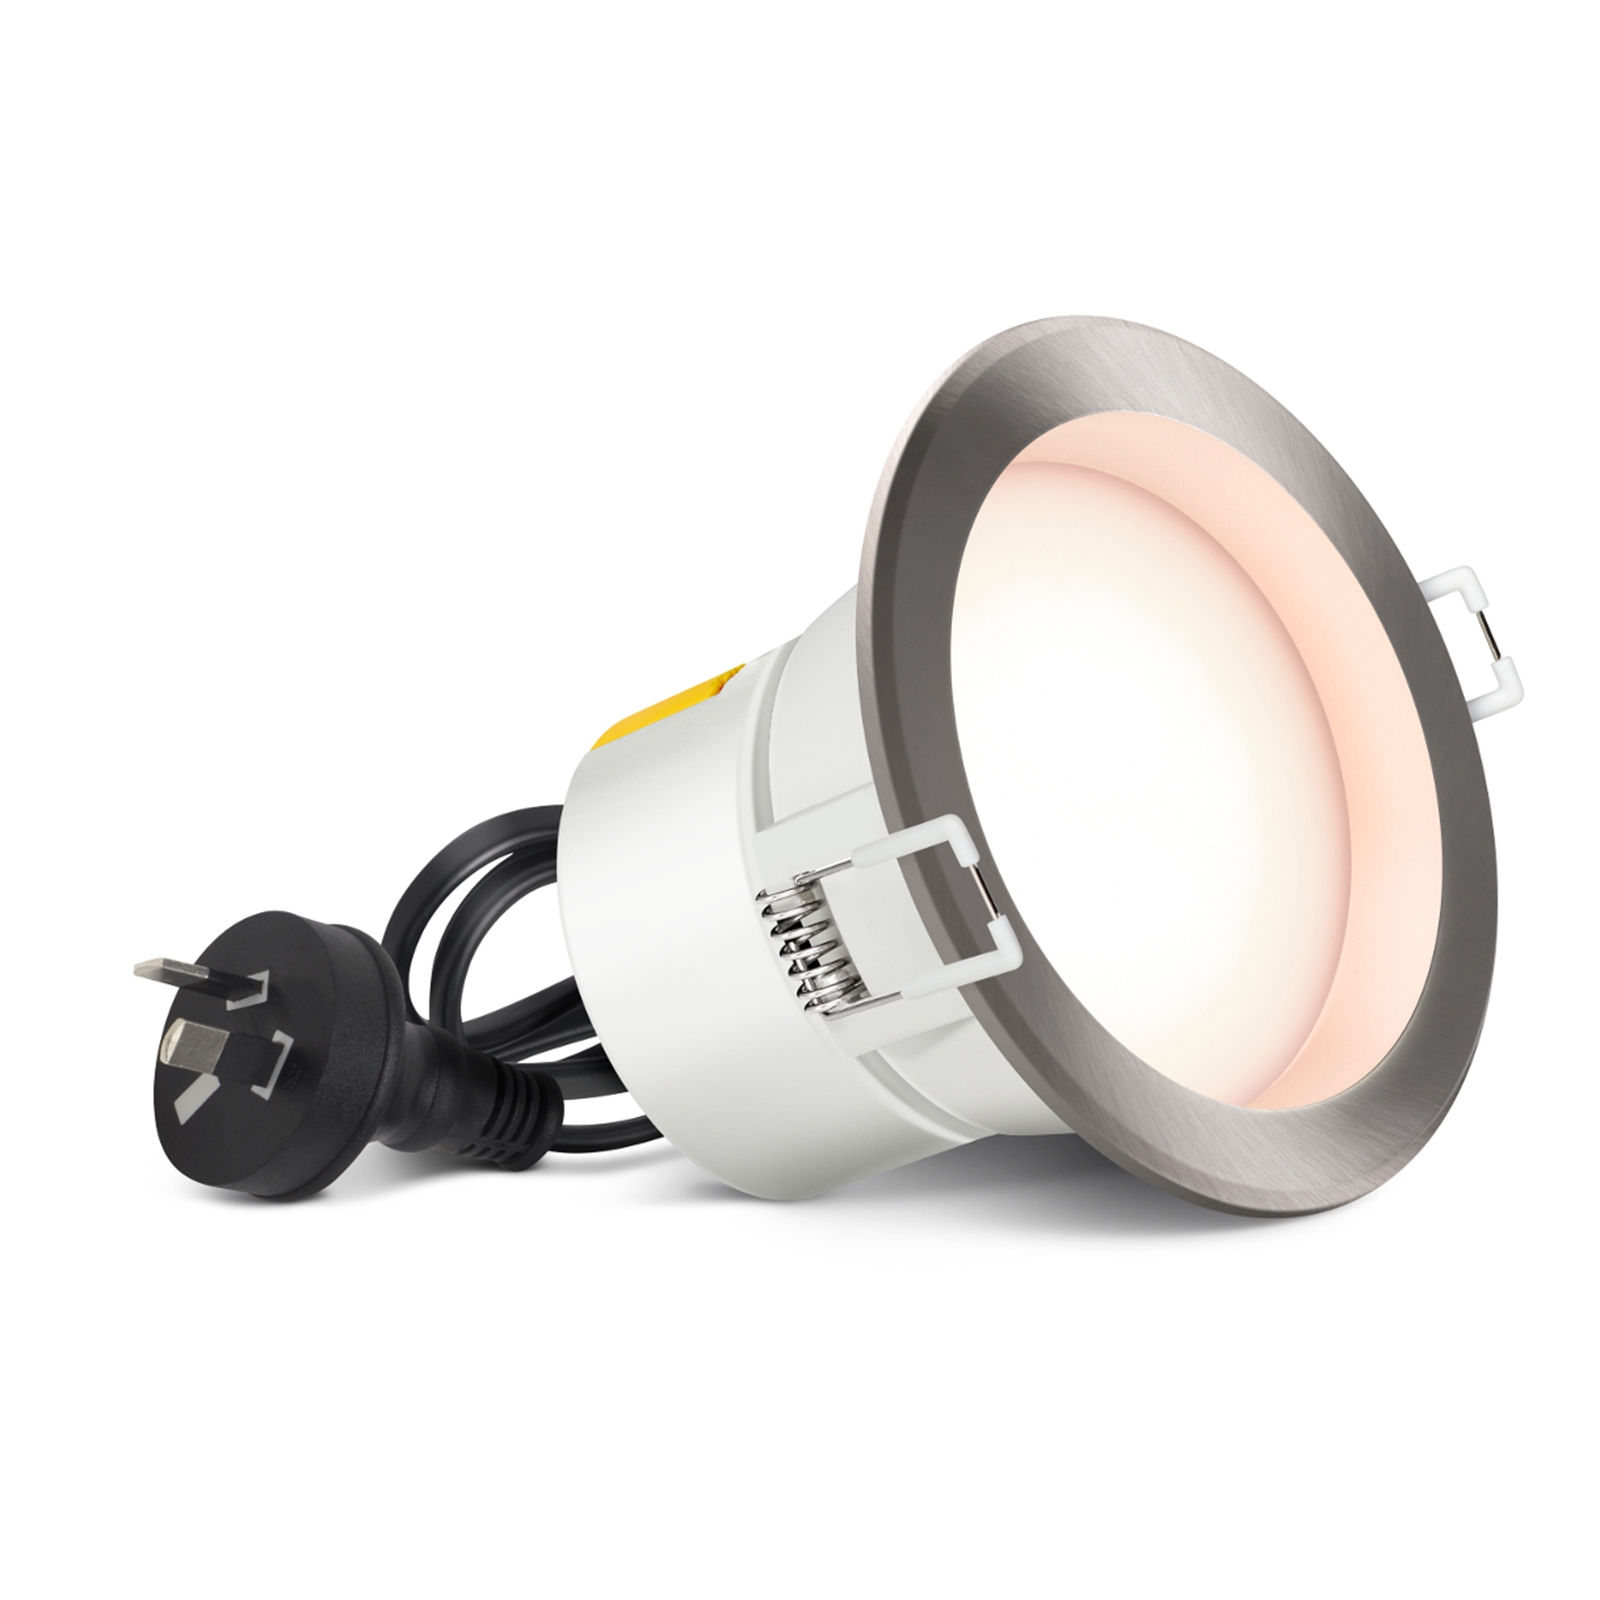 HPM 12V 7W Warm White Dimmable LED Downlight